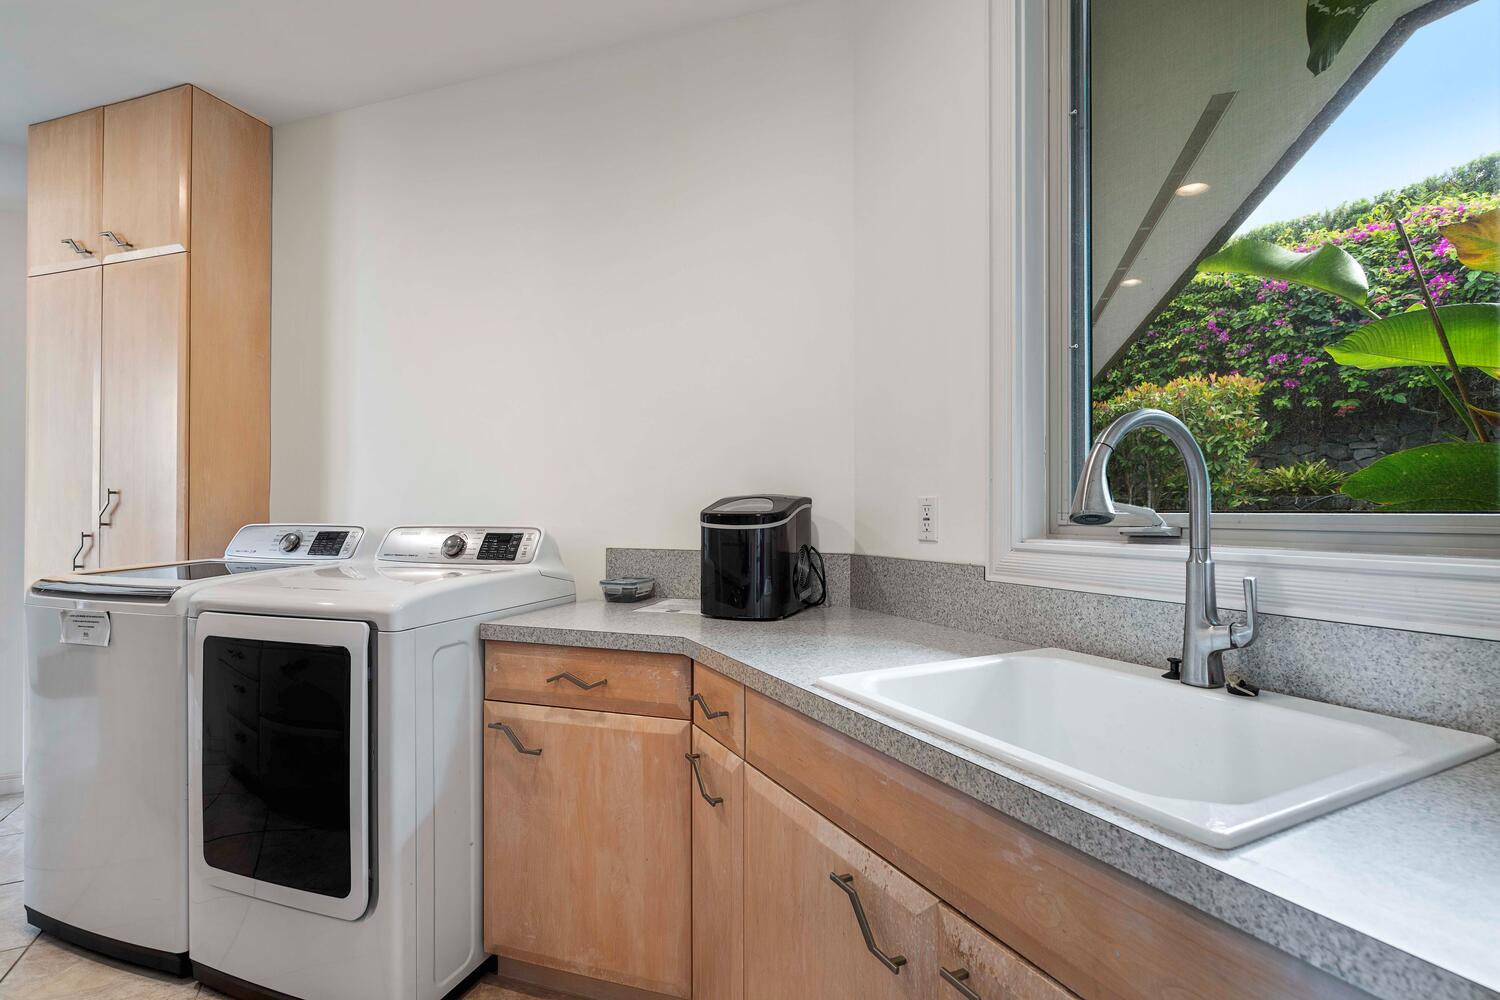 Kailua Kona Vacation Rentals, Blue Hawaii - Over sized laundry room with washer, dryer and large sink